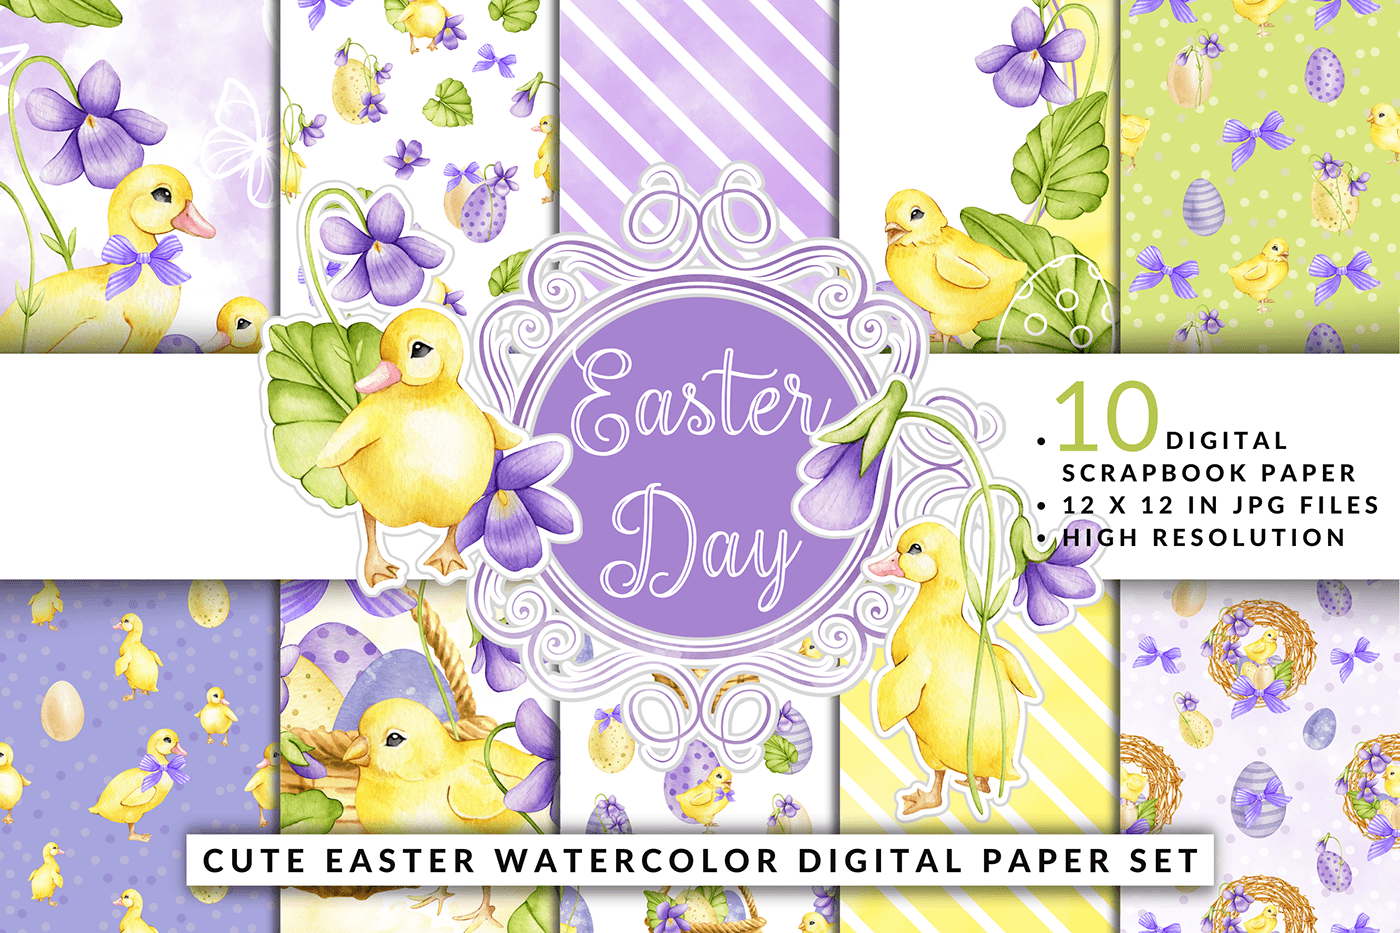 background Chick cute digital paper duck Easter egg scrapbook seamless pattern watercolor